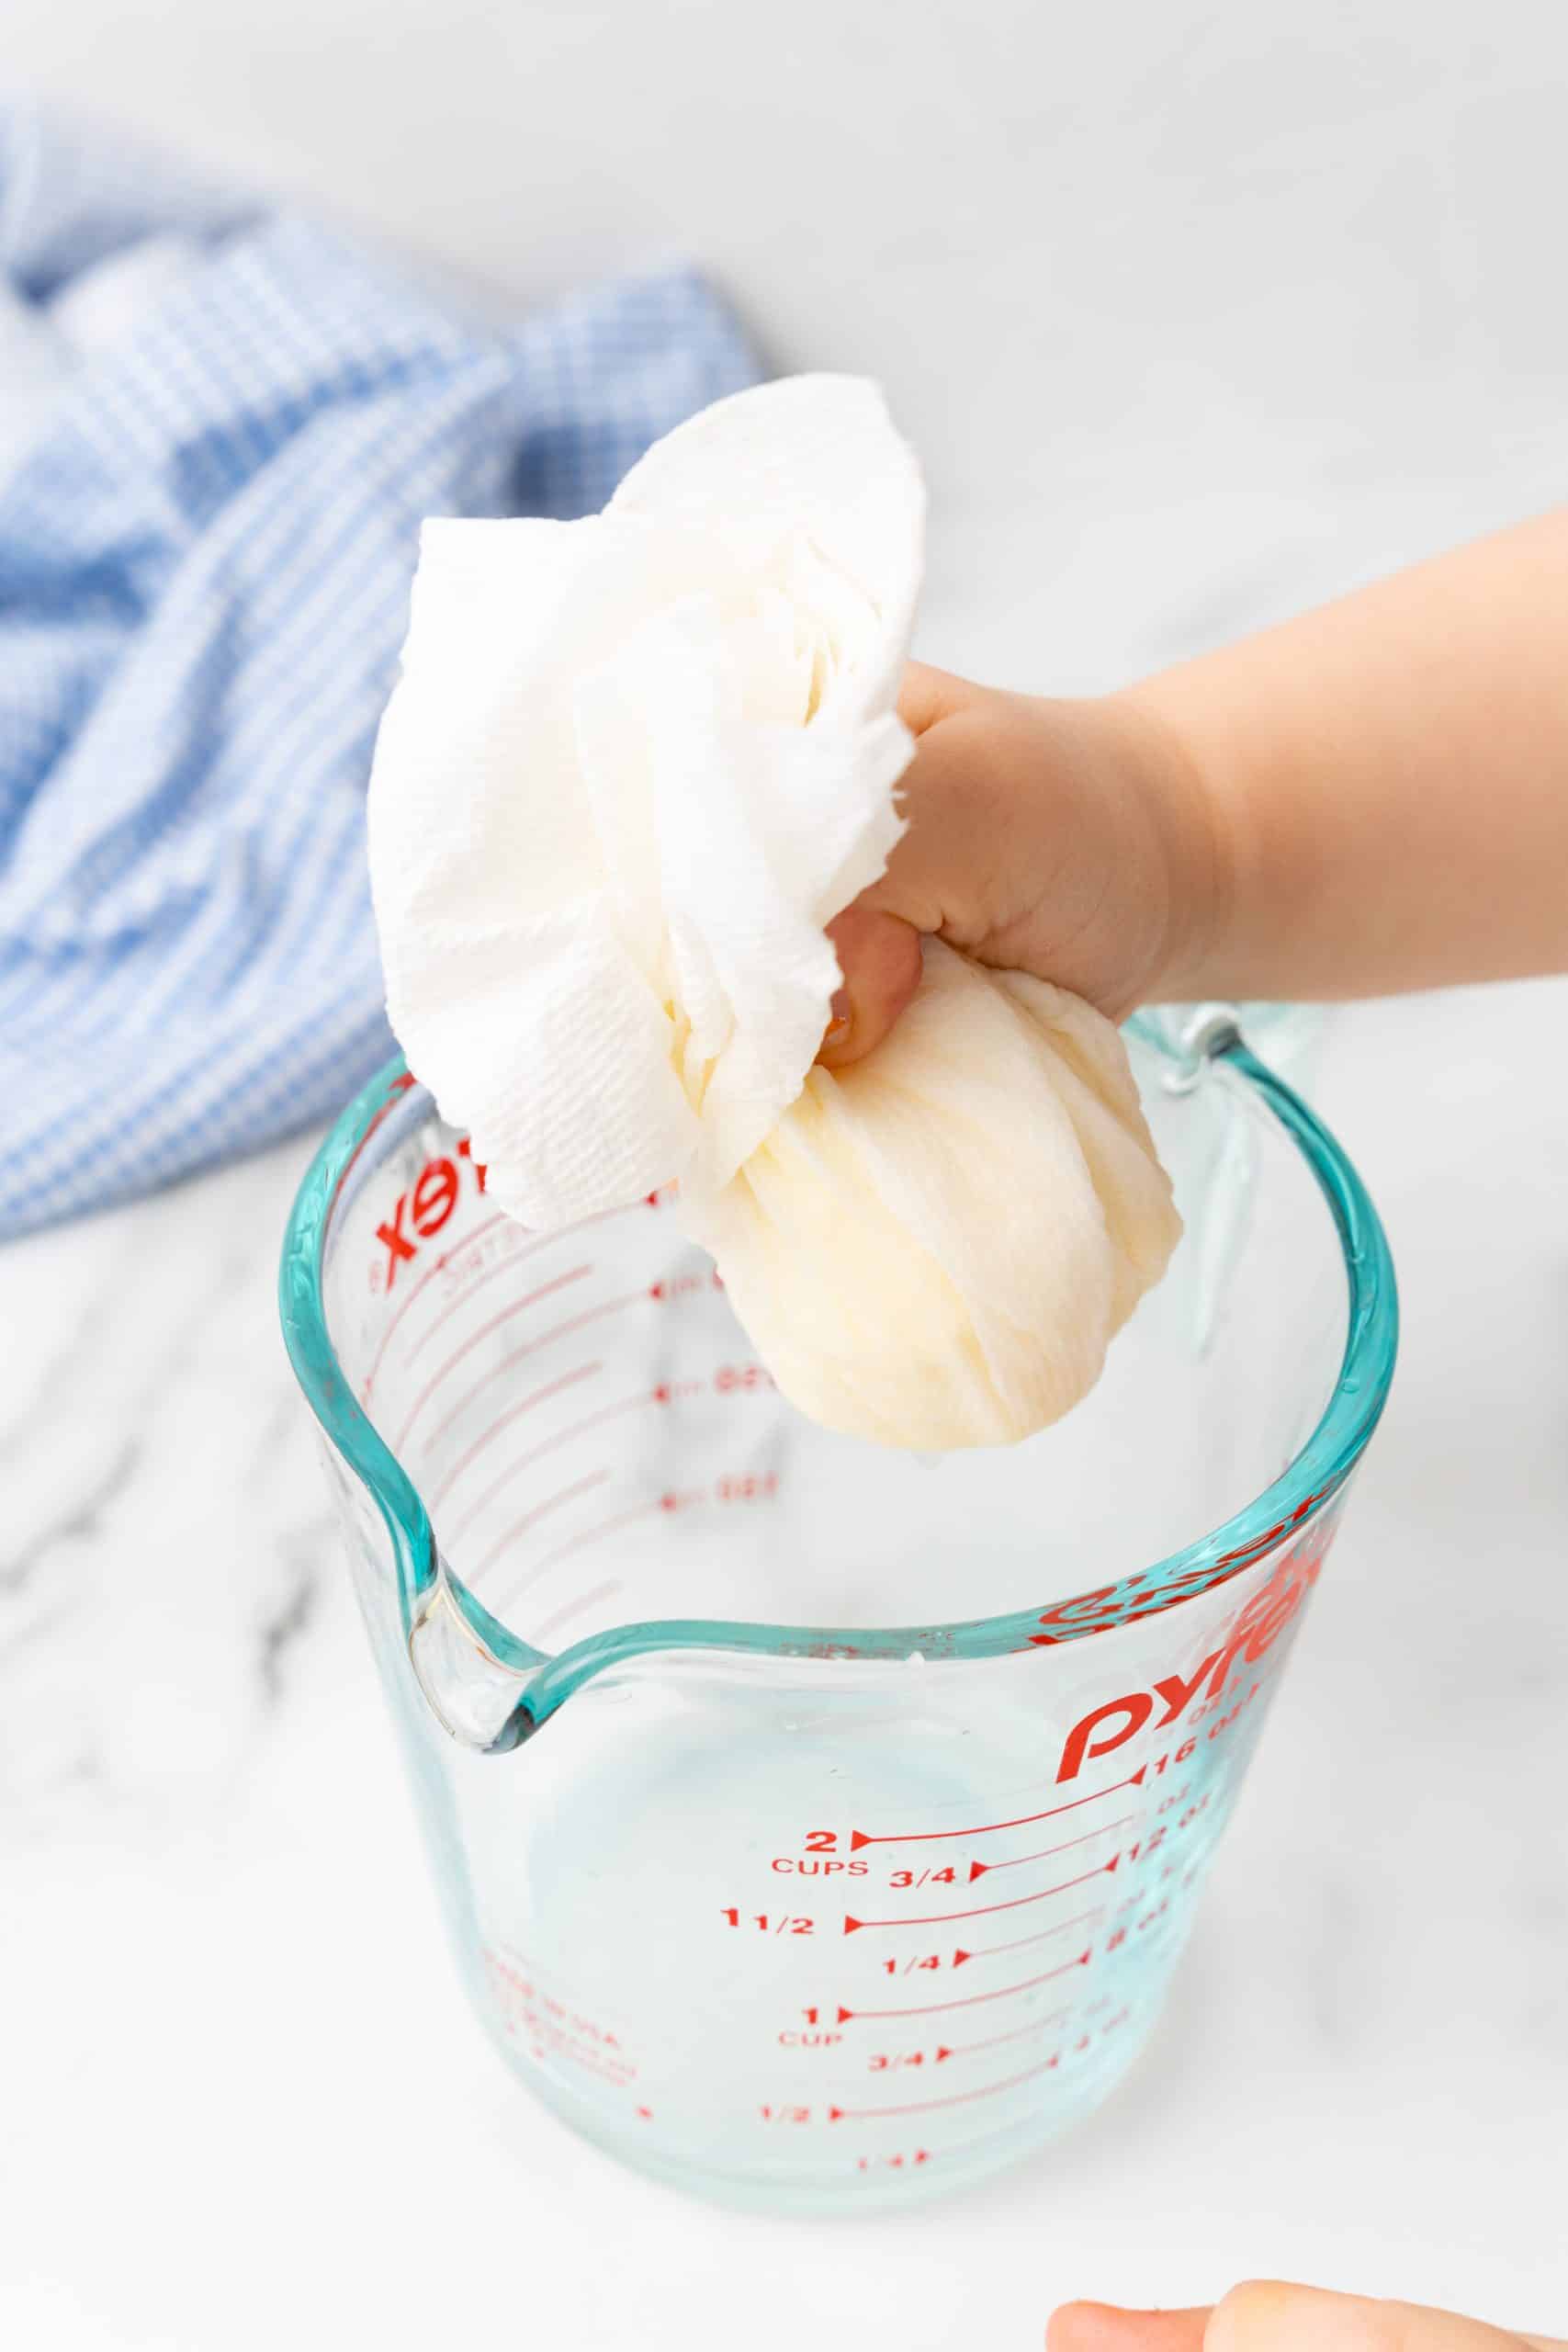 a small hand squeezing butter in a paper towel over a glass measuring cup